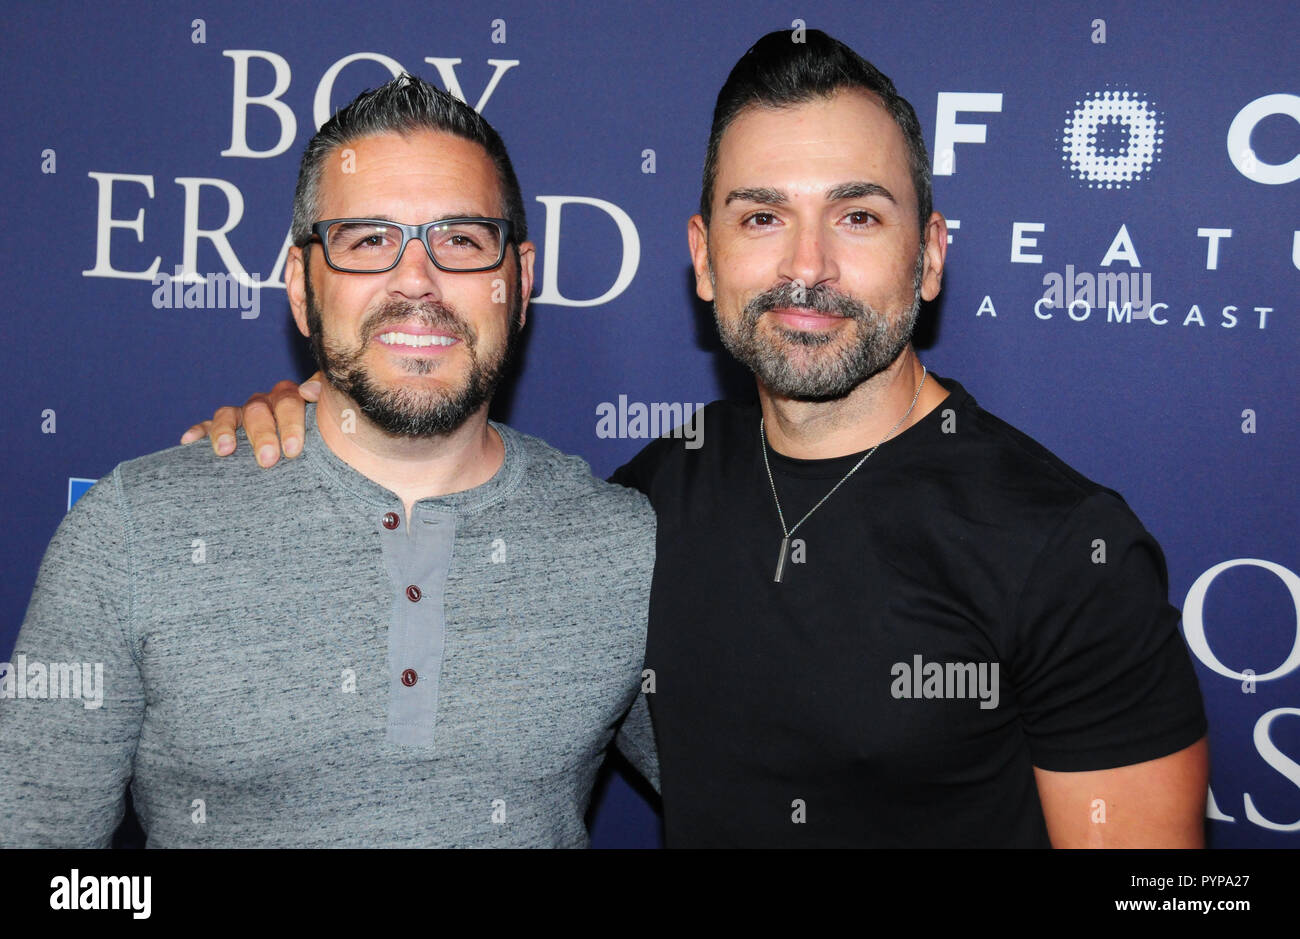 LOS ANGELES, CA - OCTOBER 29: Jeff Zarrillo and Paul Katami attend the premiere of Focus Features' 'Boy Erased' on October 29, 2018 at the Directors Guild of America in Los Angeles, California. Photo by Barry King/Alamy Live News Stock Photo